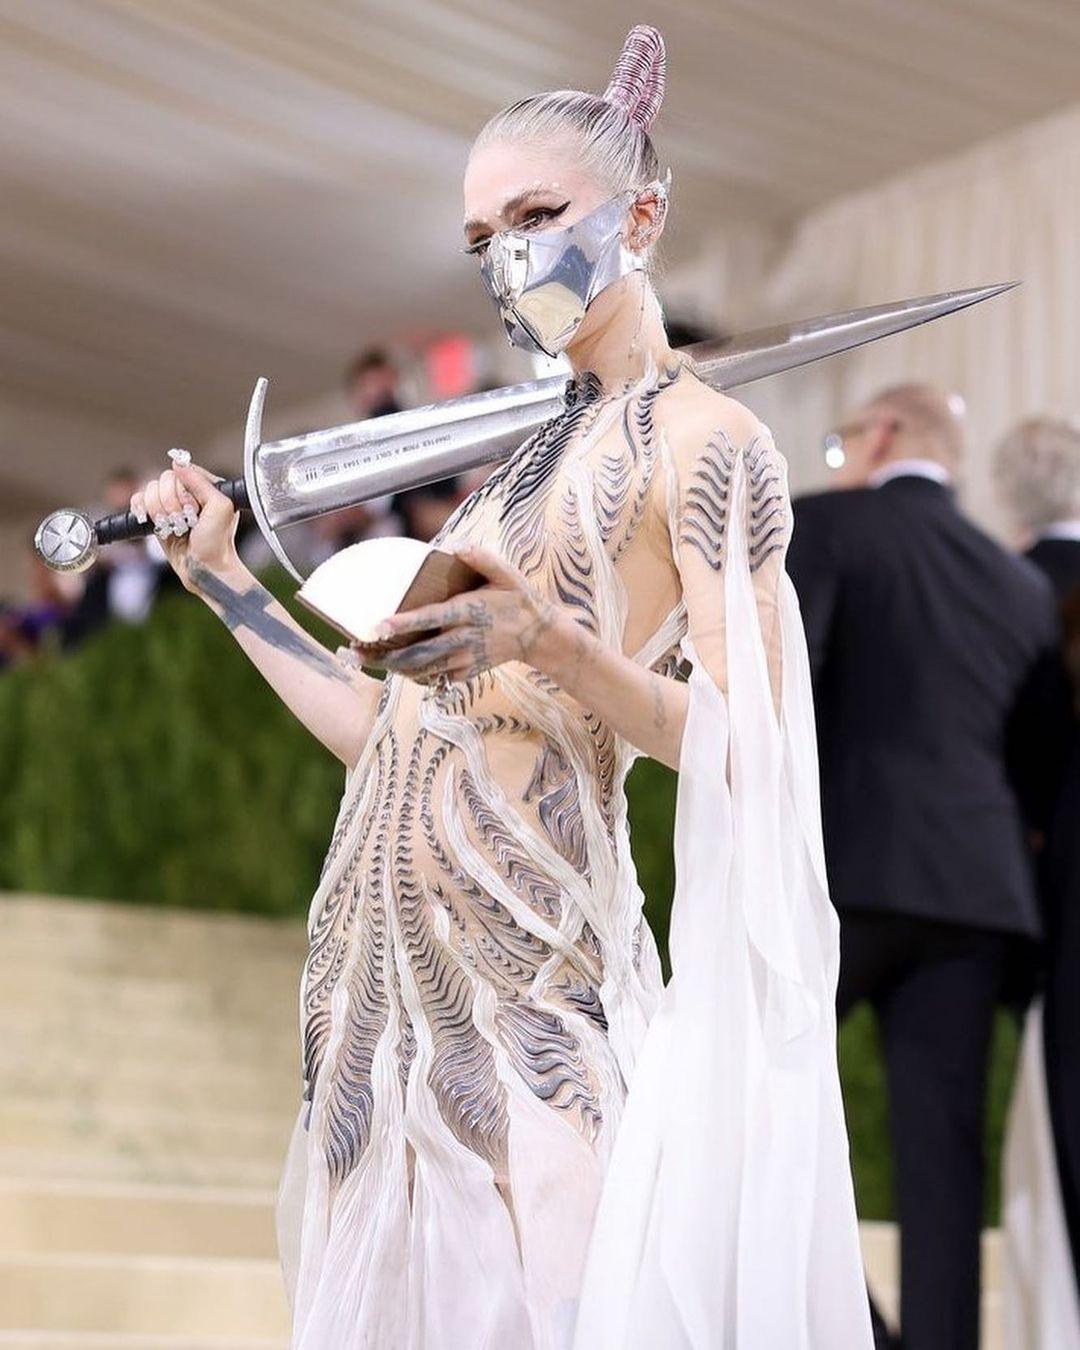 A photo showing Grimes dressed in a silver-themed dress with a shiny sword hanging over her shoulder